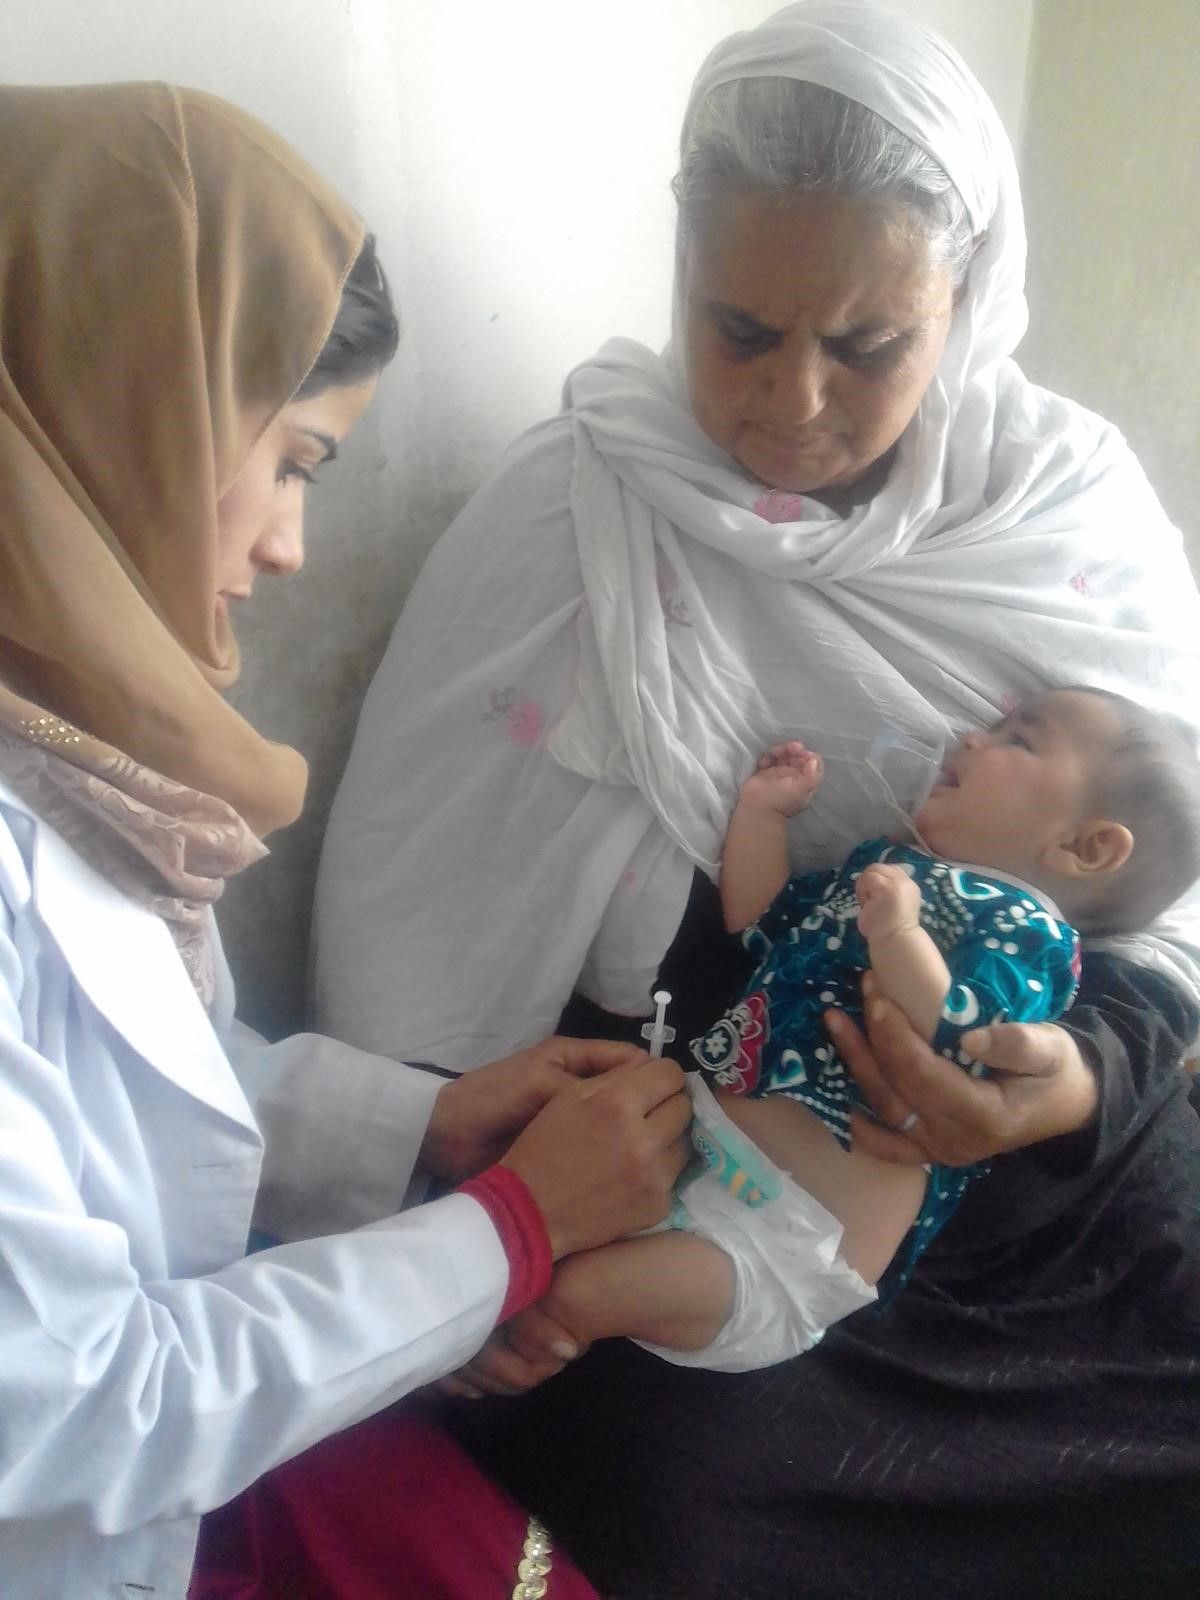 A female doctor tending to a baby and its mother in the Saving Moses BirthAid